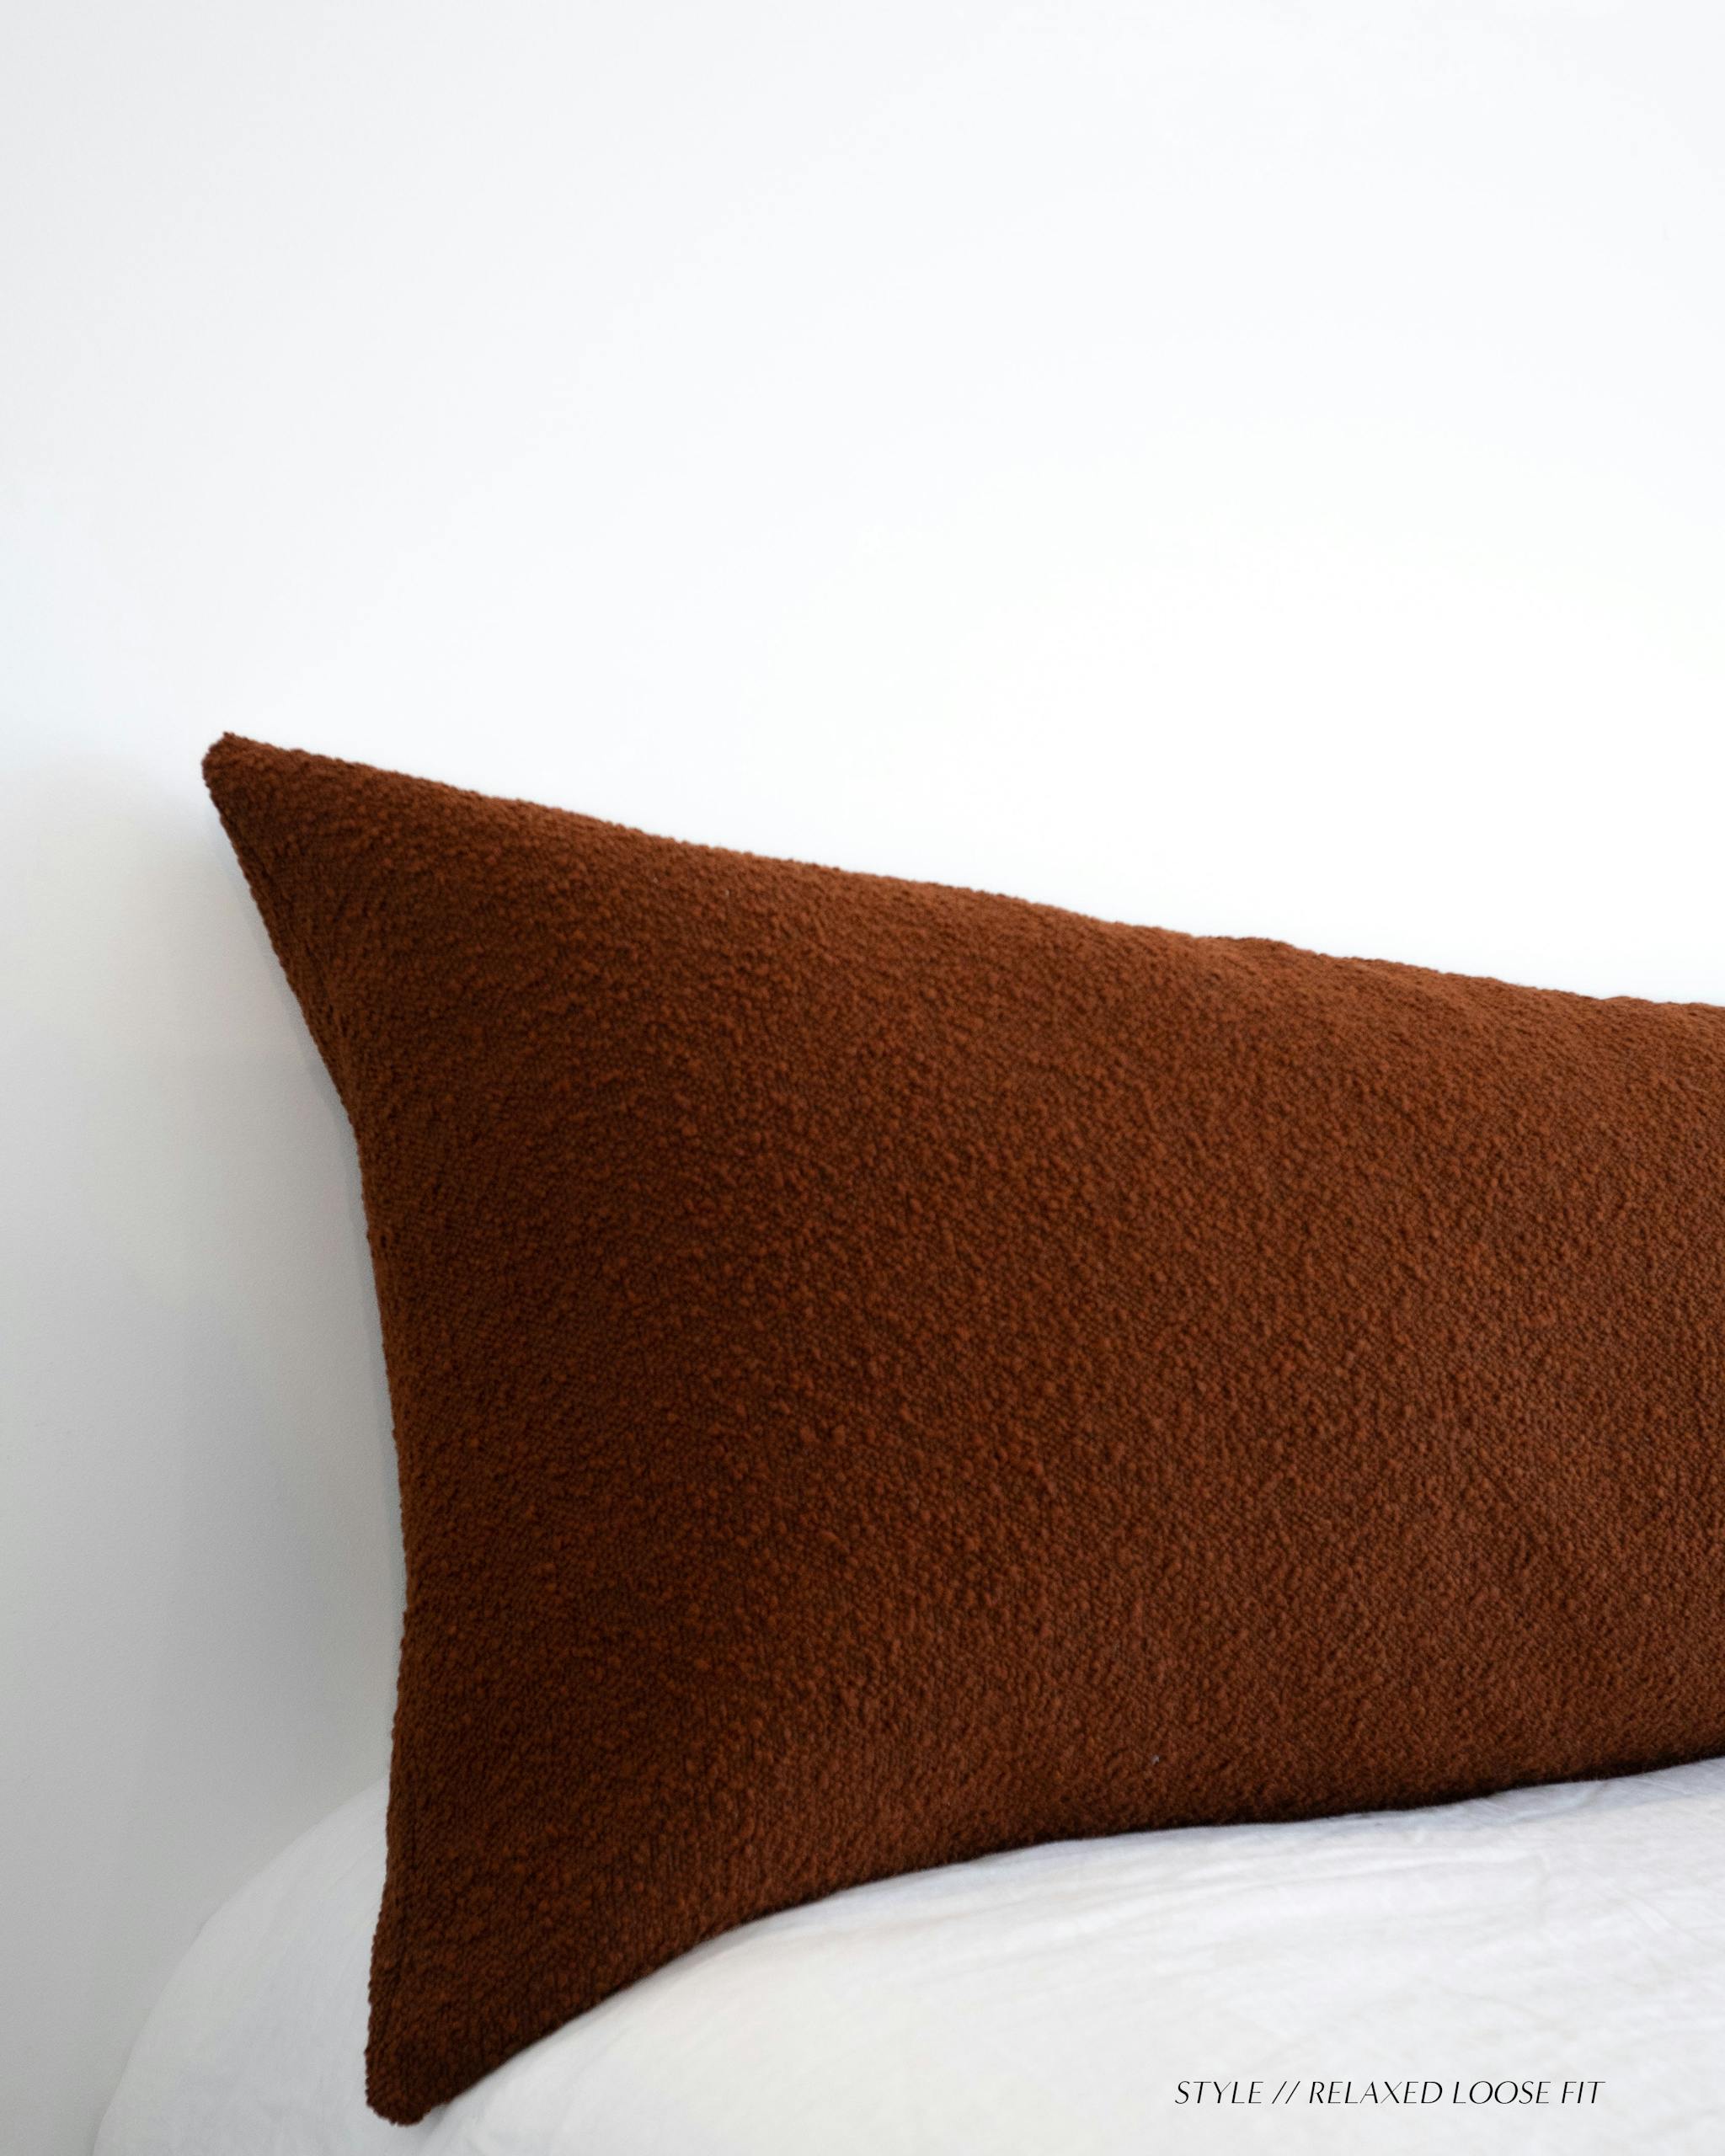 Handmade Boucle Bedhead Cushion - STYLE-RELAXEDLOOSEFIT